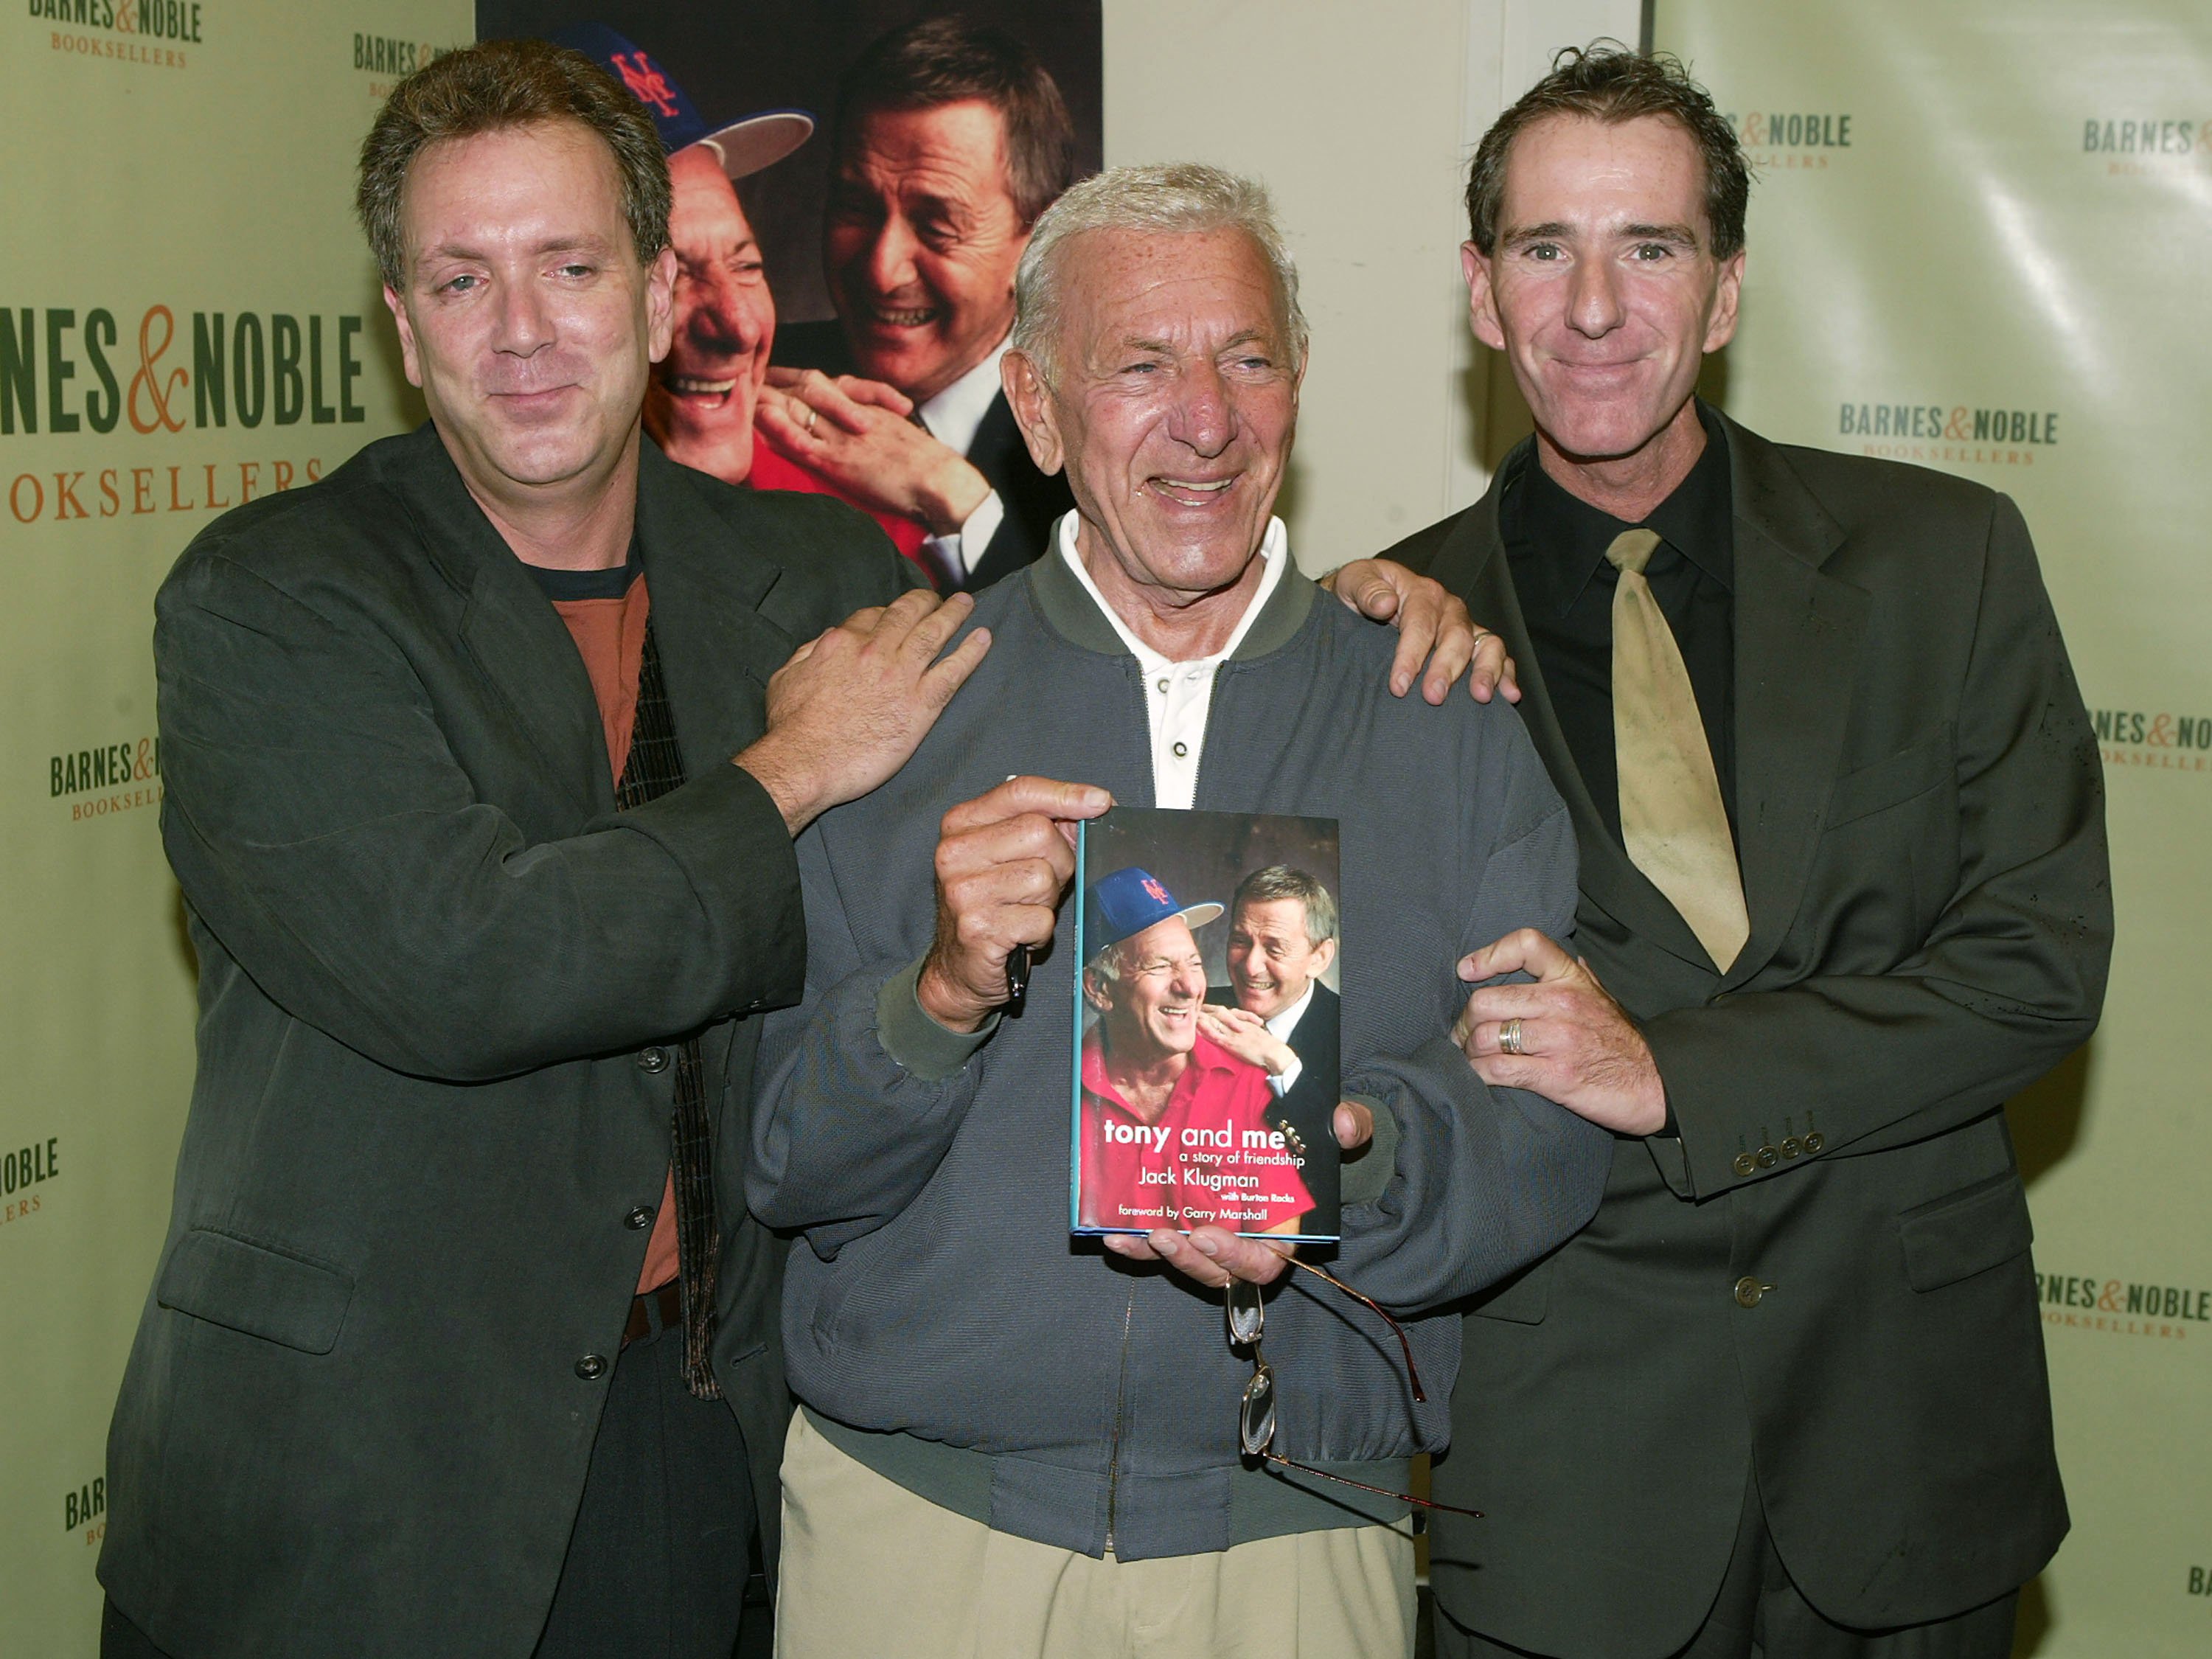 Jack Klugman and sons Adam Klugman (L) and David Klugman attend a book signing at Barnes and Noble on September 29, 2005 in New York City | Photo: Getty Images